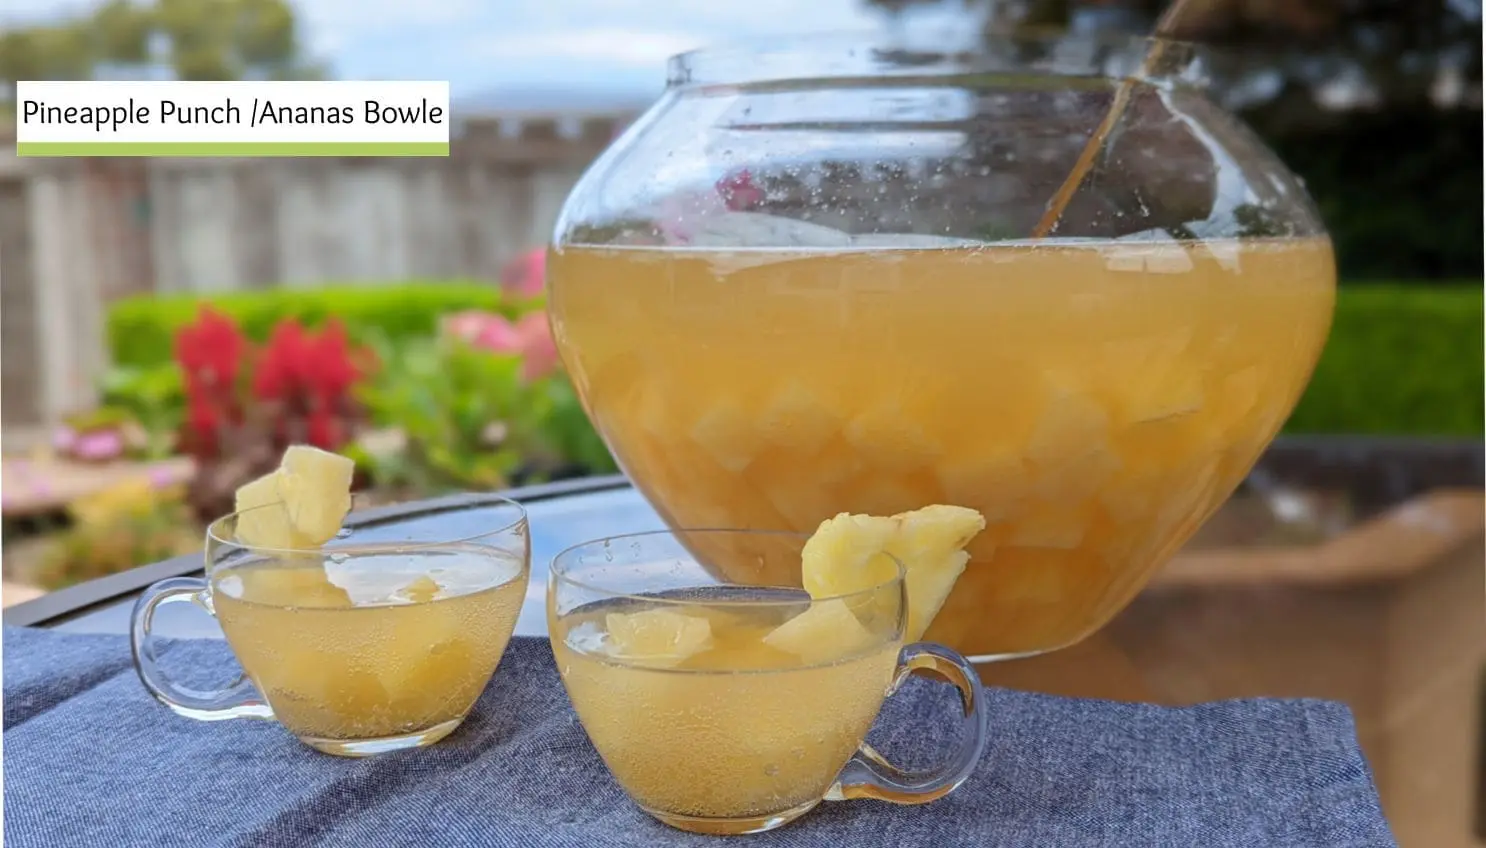 Easy Pineapple Punch Recipe -Ananas Bowle for Parties!